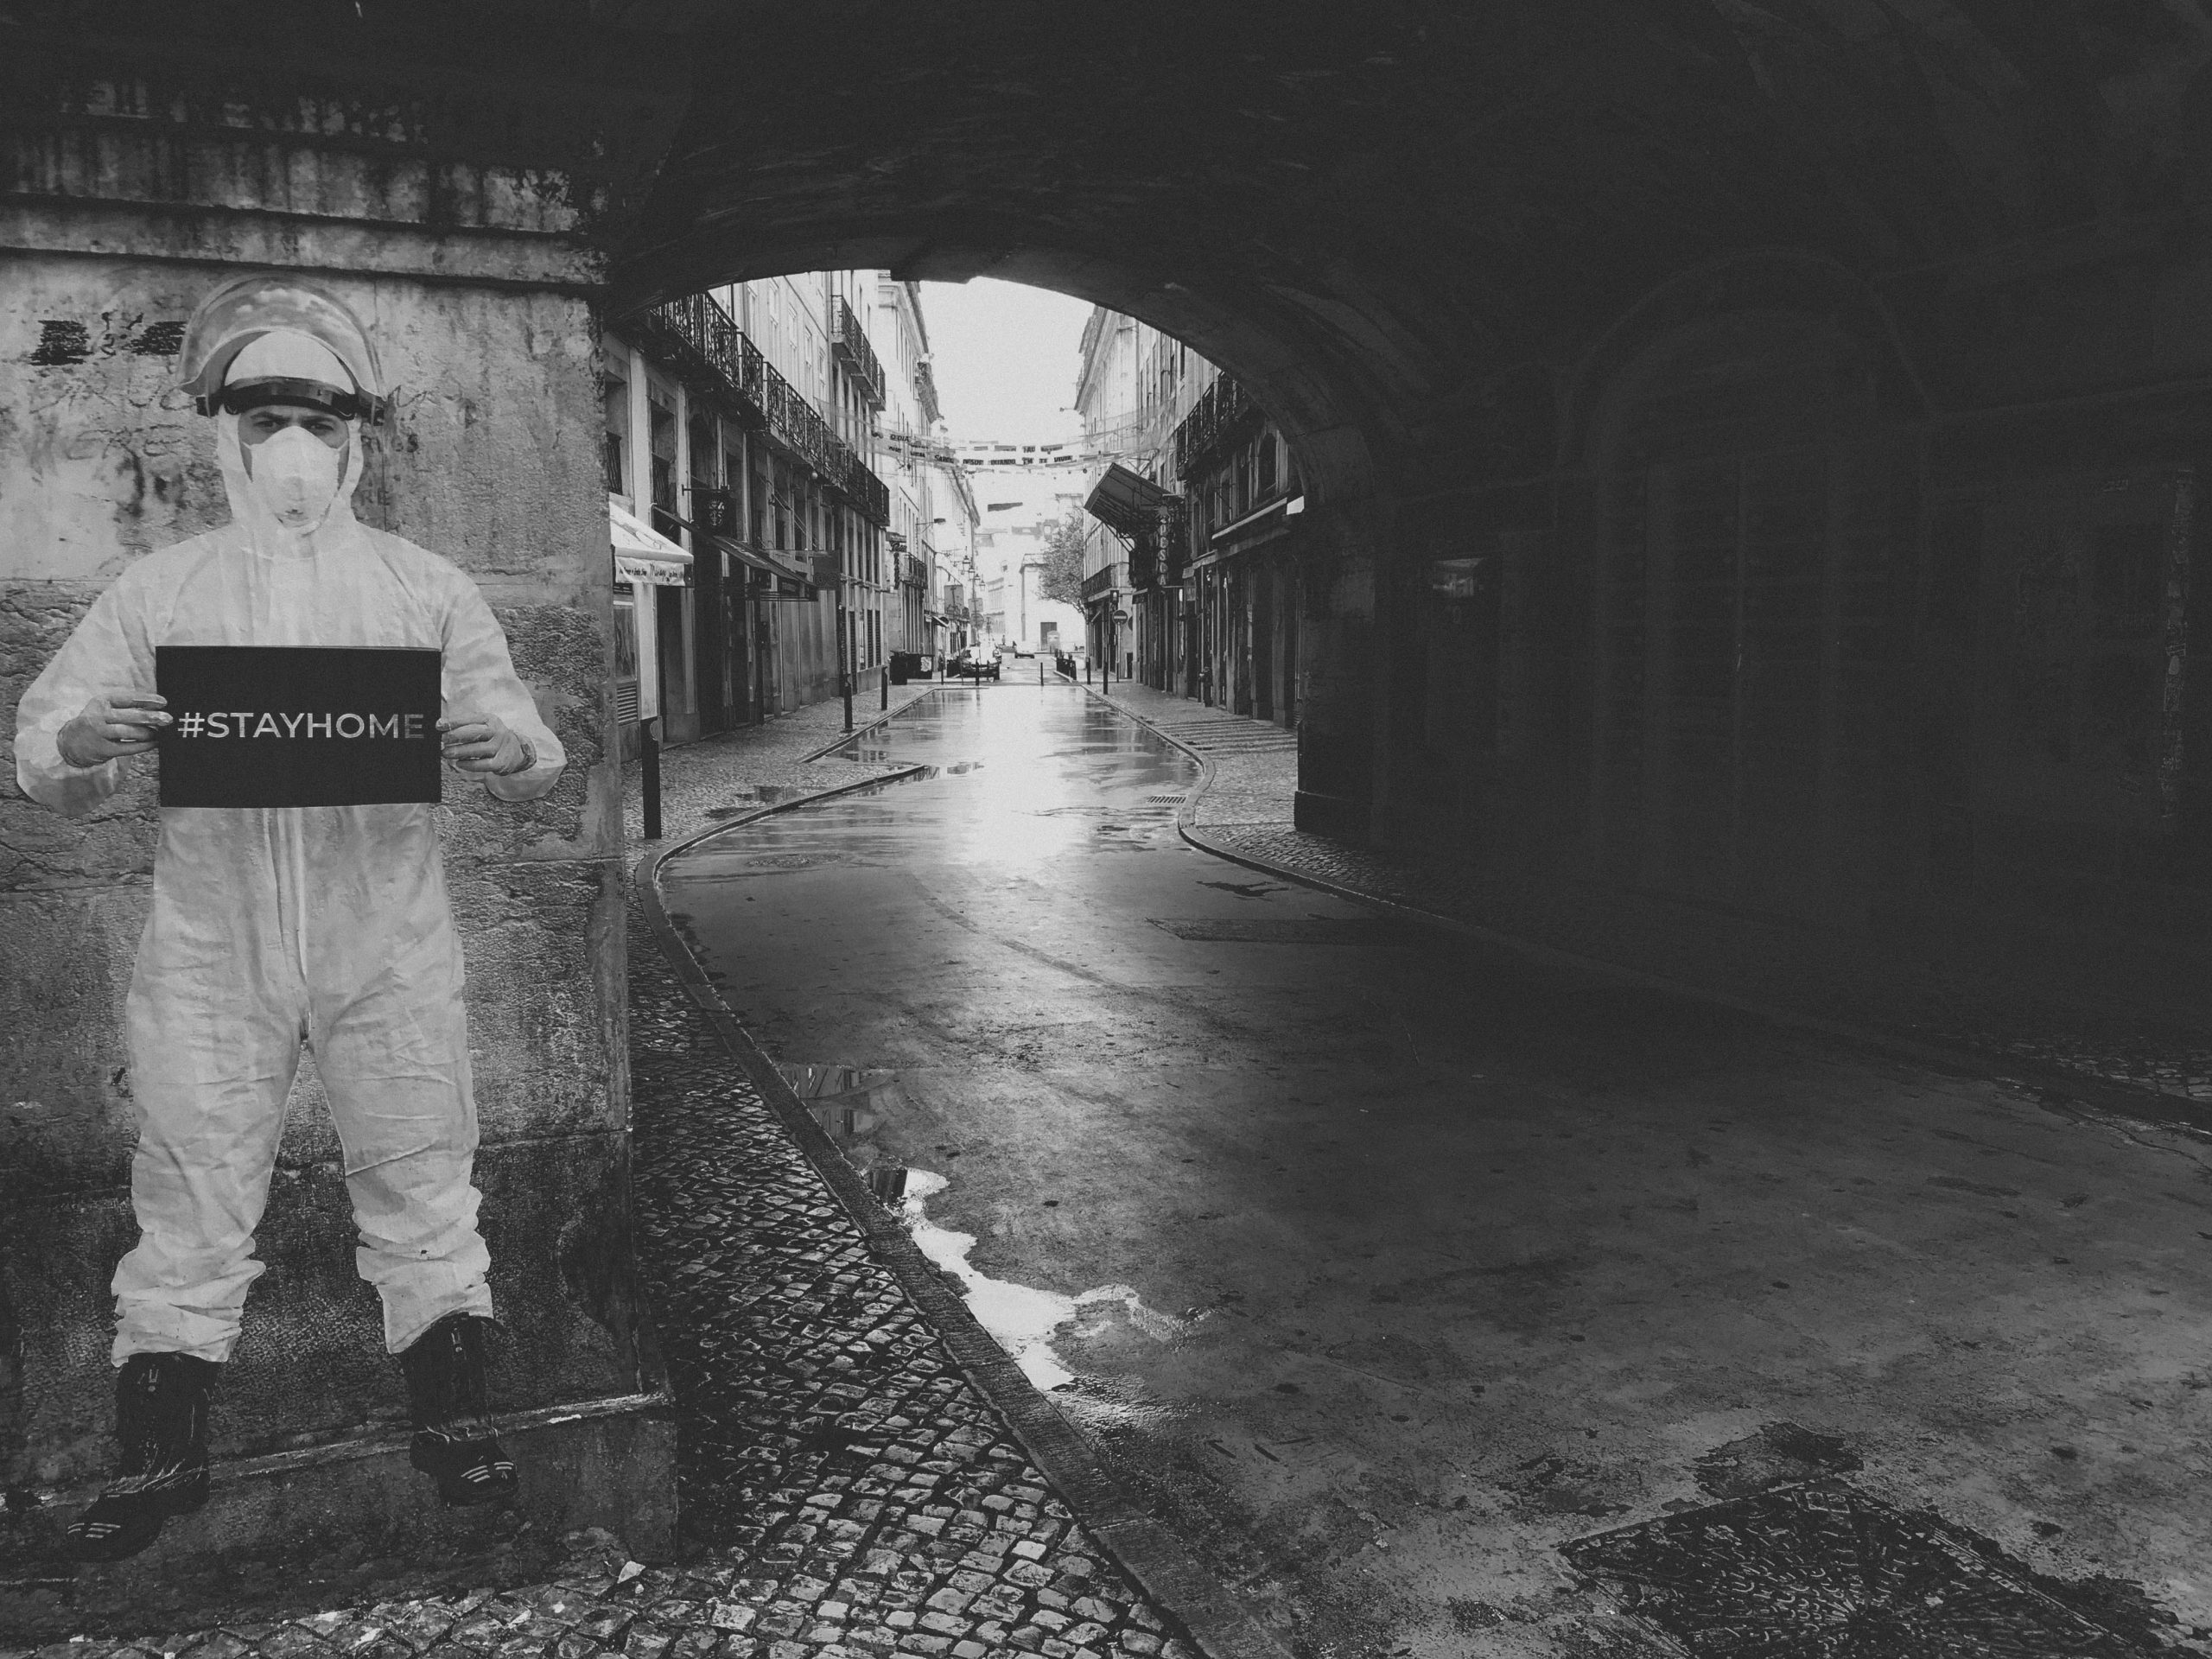 White/black image of a deserted street with an image printed on the wall. The image is a person in protective gear and a face mask, holding a sign that reads "stay home".